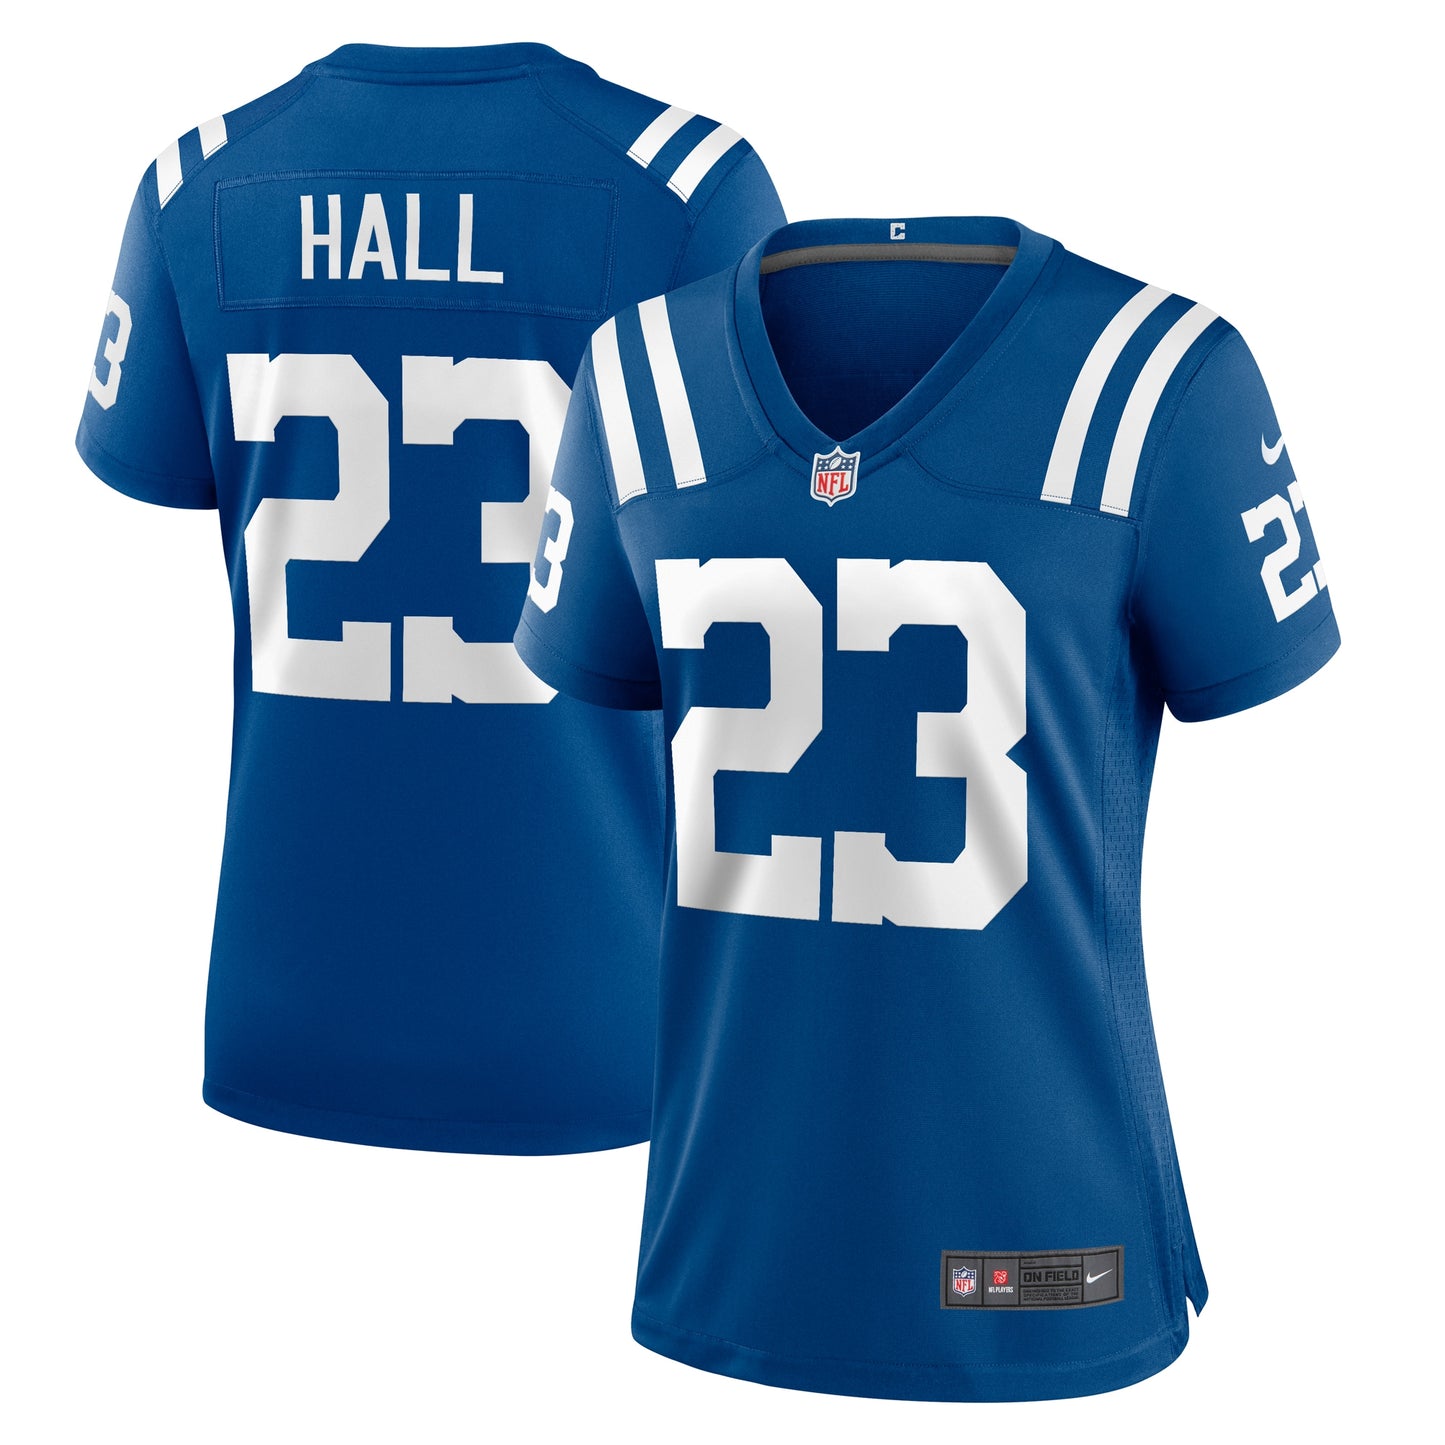 Darren Hall Indianapolis Colts Nike Women's Team Game Jersey -  Royal